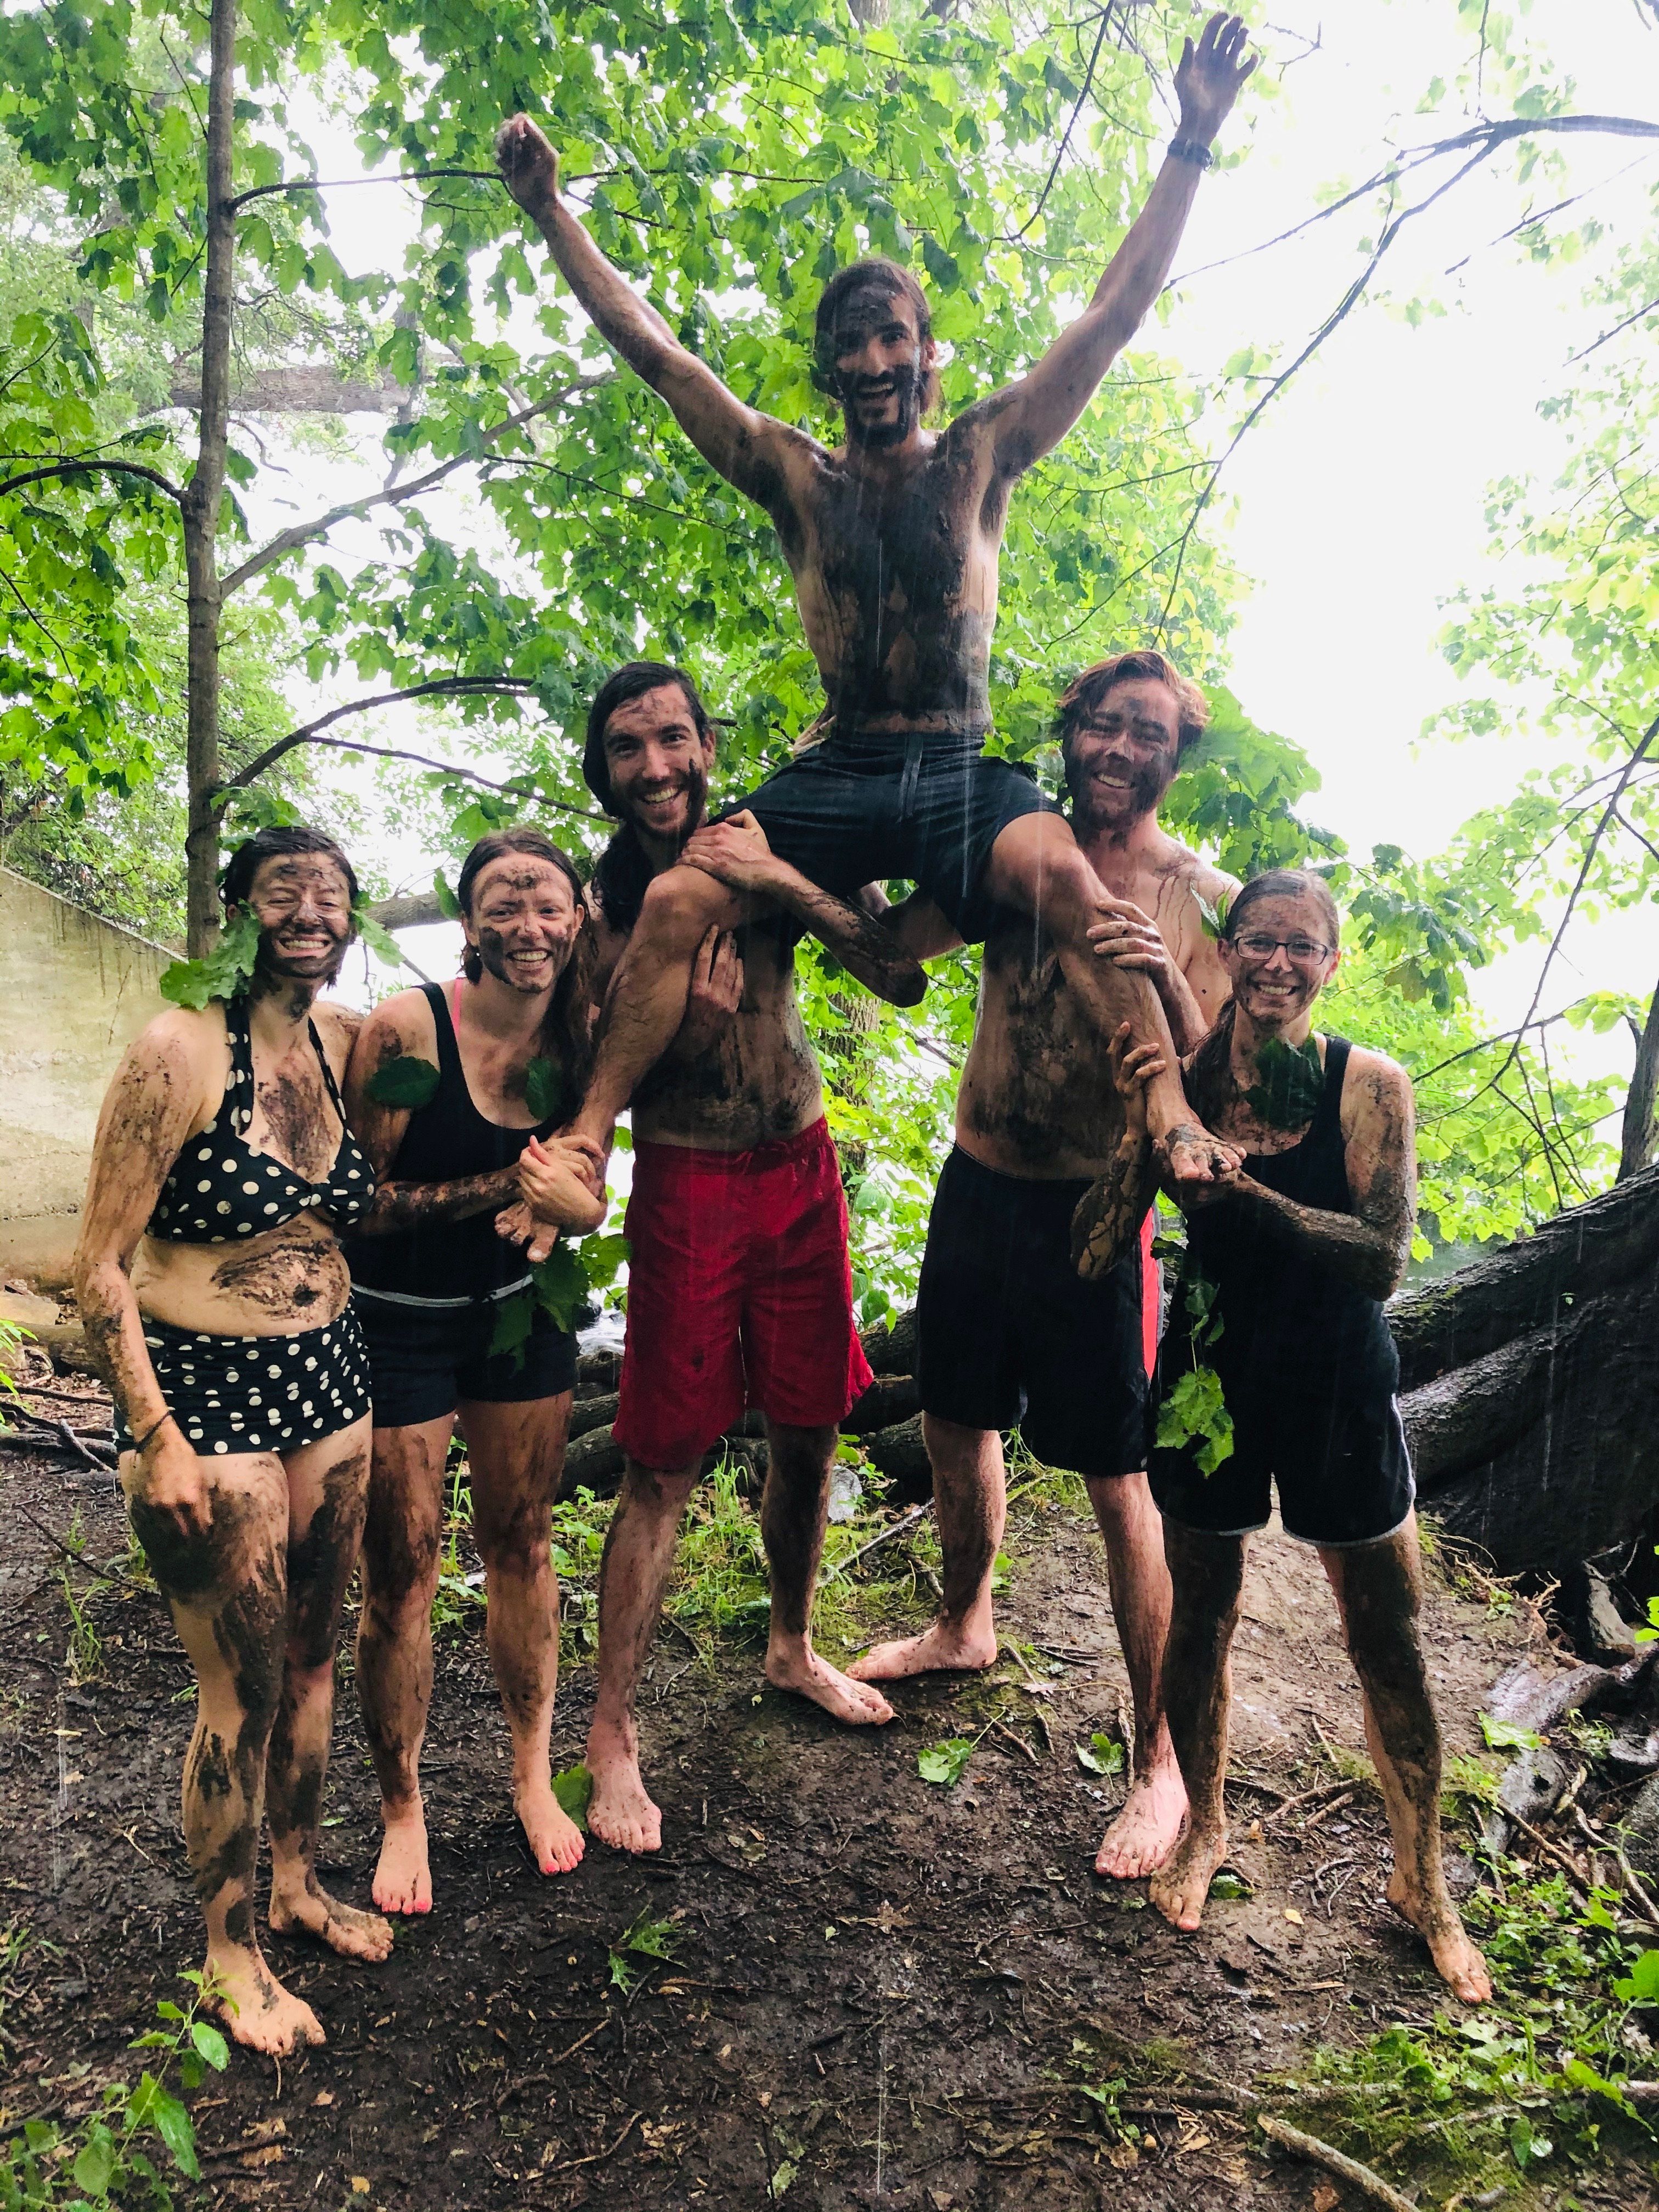 Muddy Summiteers in swimsuits stand triumphant to celebrate the summer solstice. One member is held help by the others, arms outstretched celebrating. (Circa summer 2020)